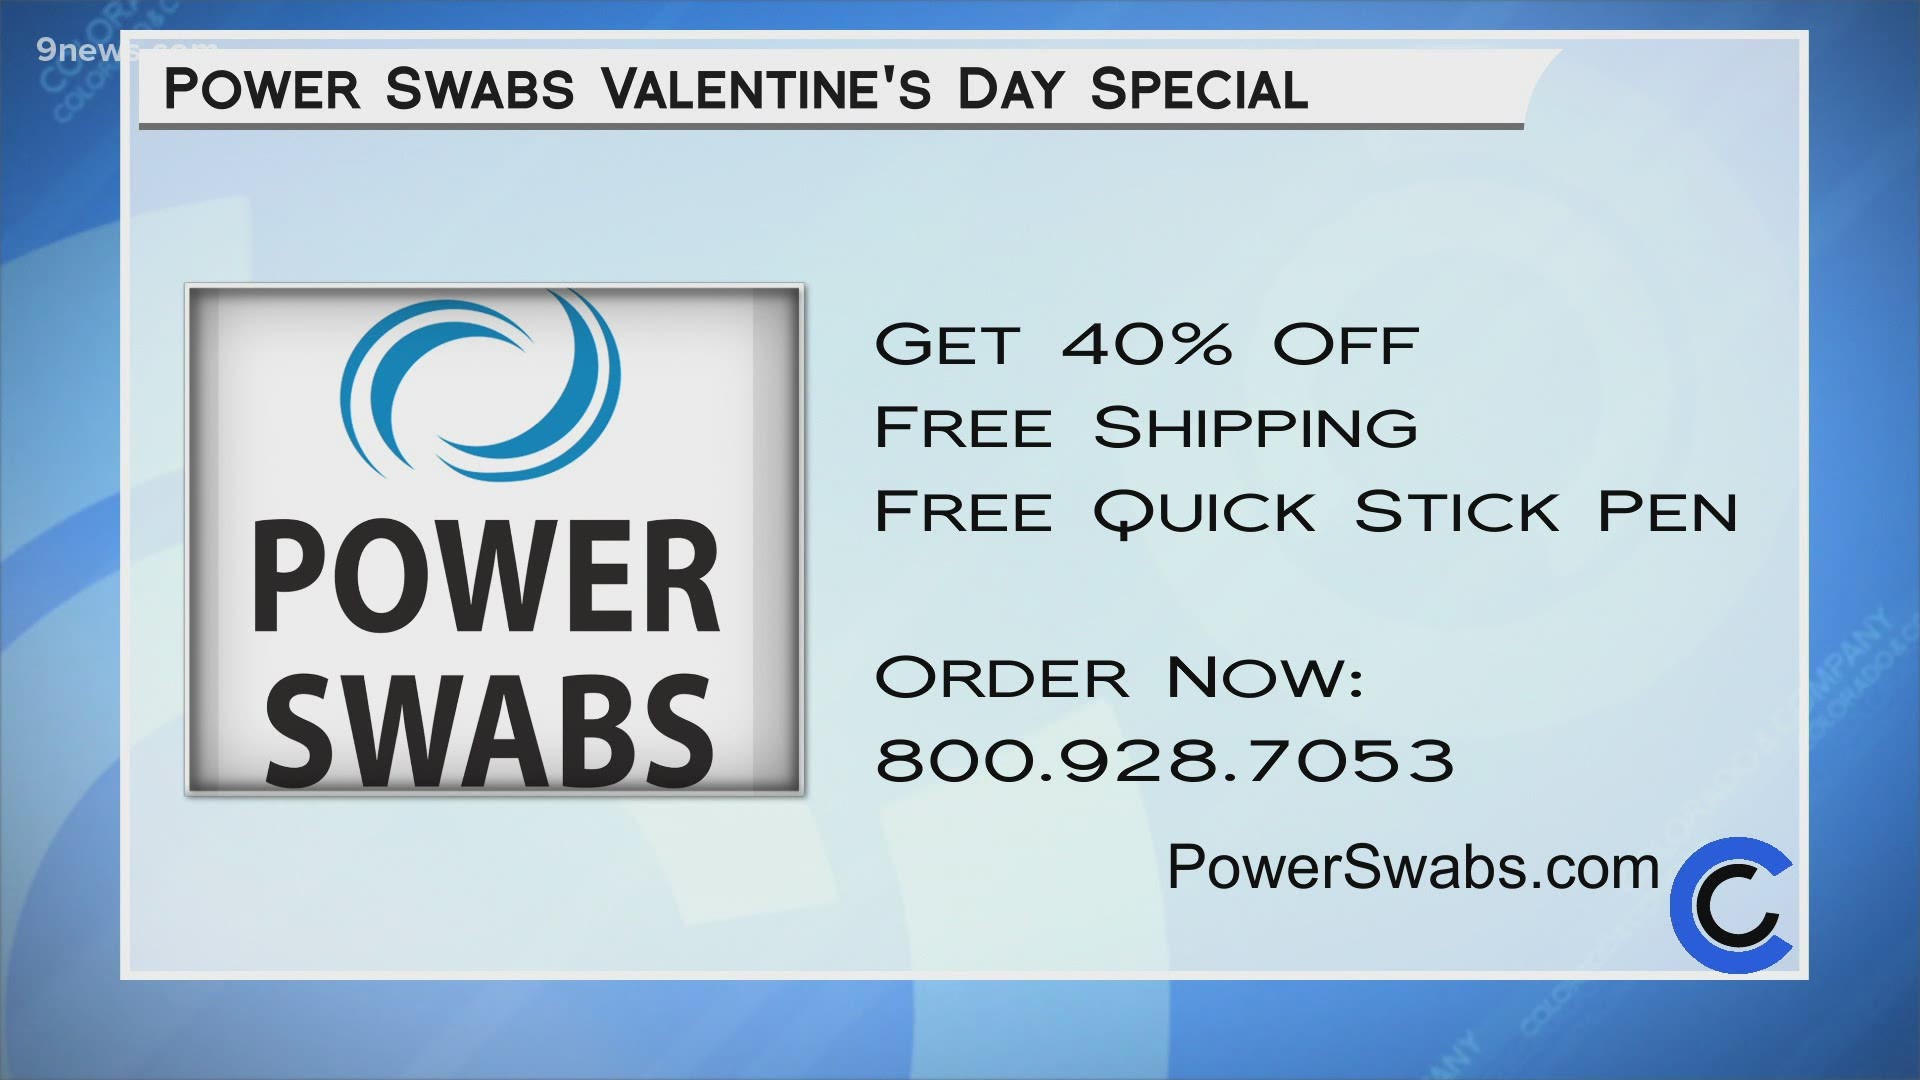 Get 40% off and a free Quick Stick, as well as free shipping when you call 800.928.7053 or visit PowerSwabs.com.